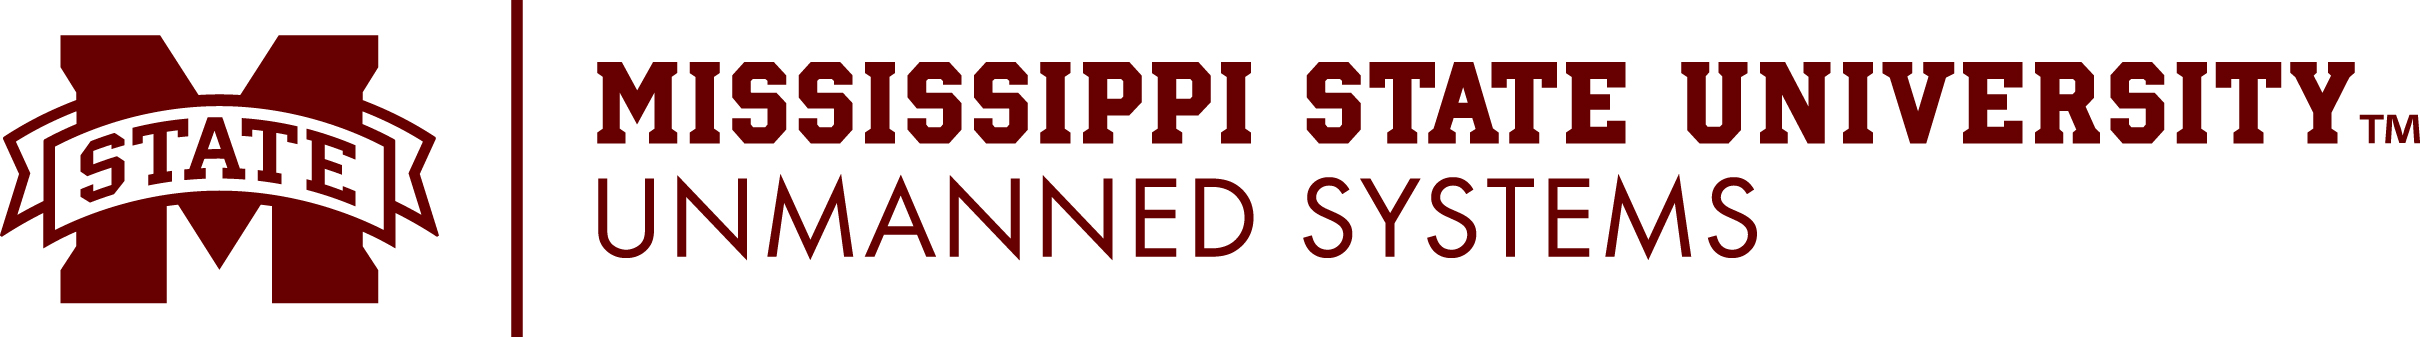 Mississippi State University Unmanned Systems